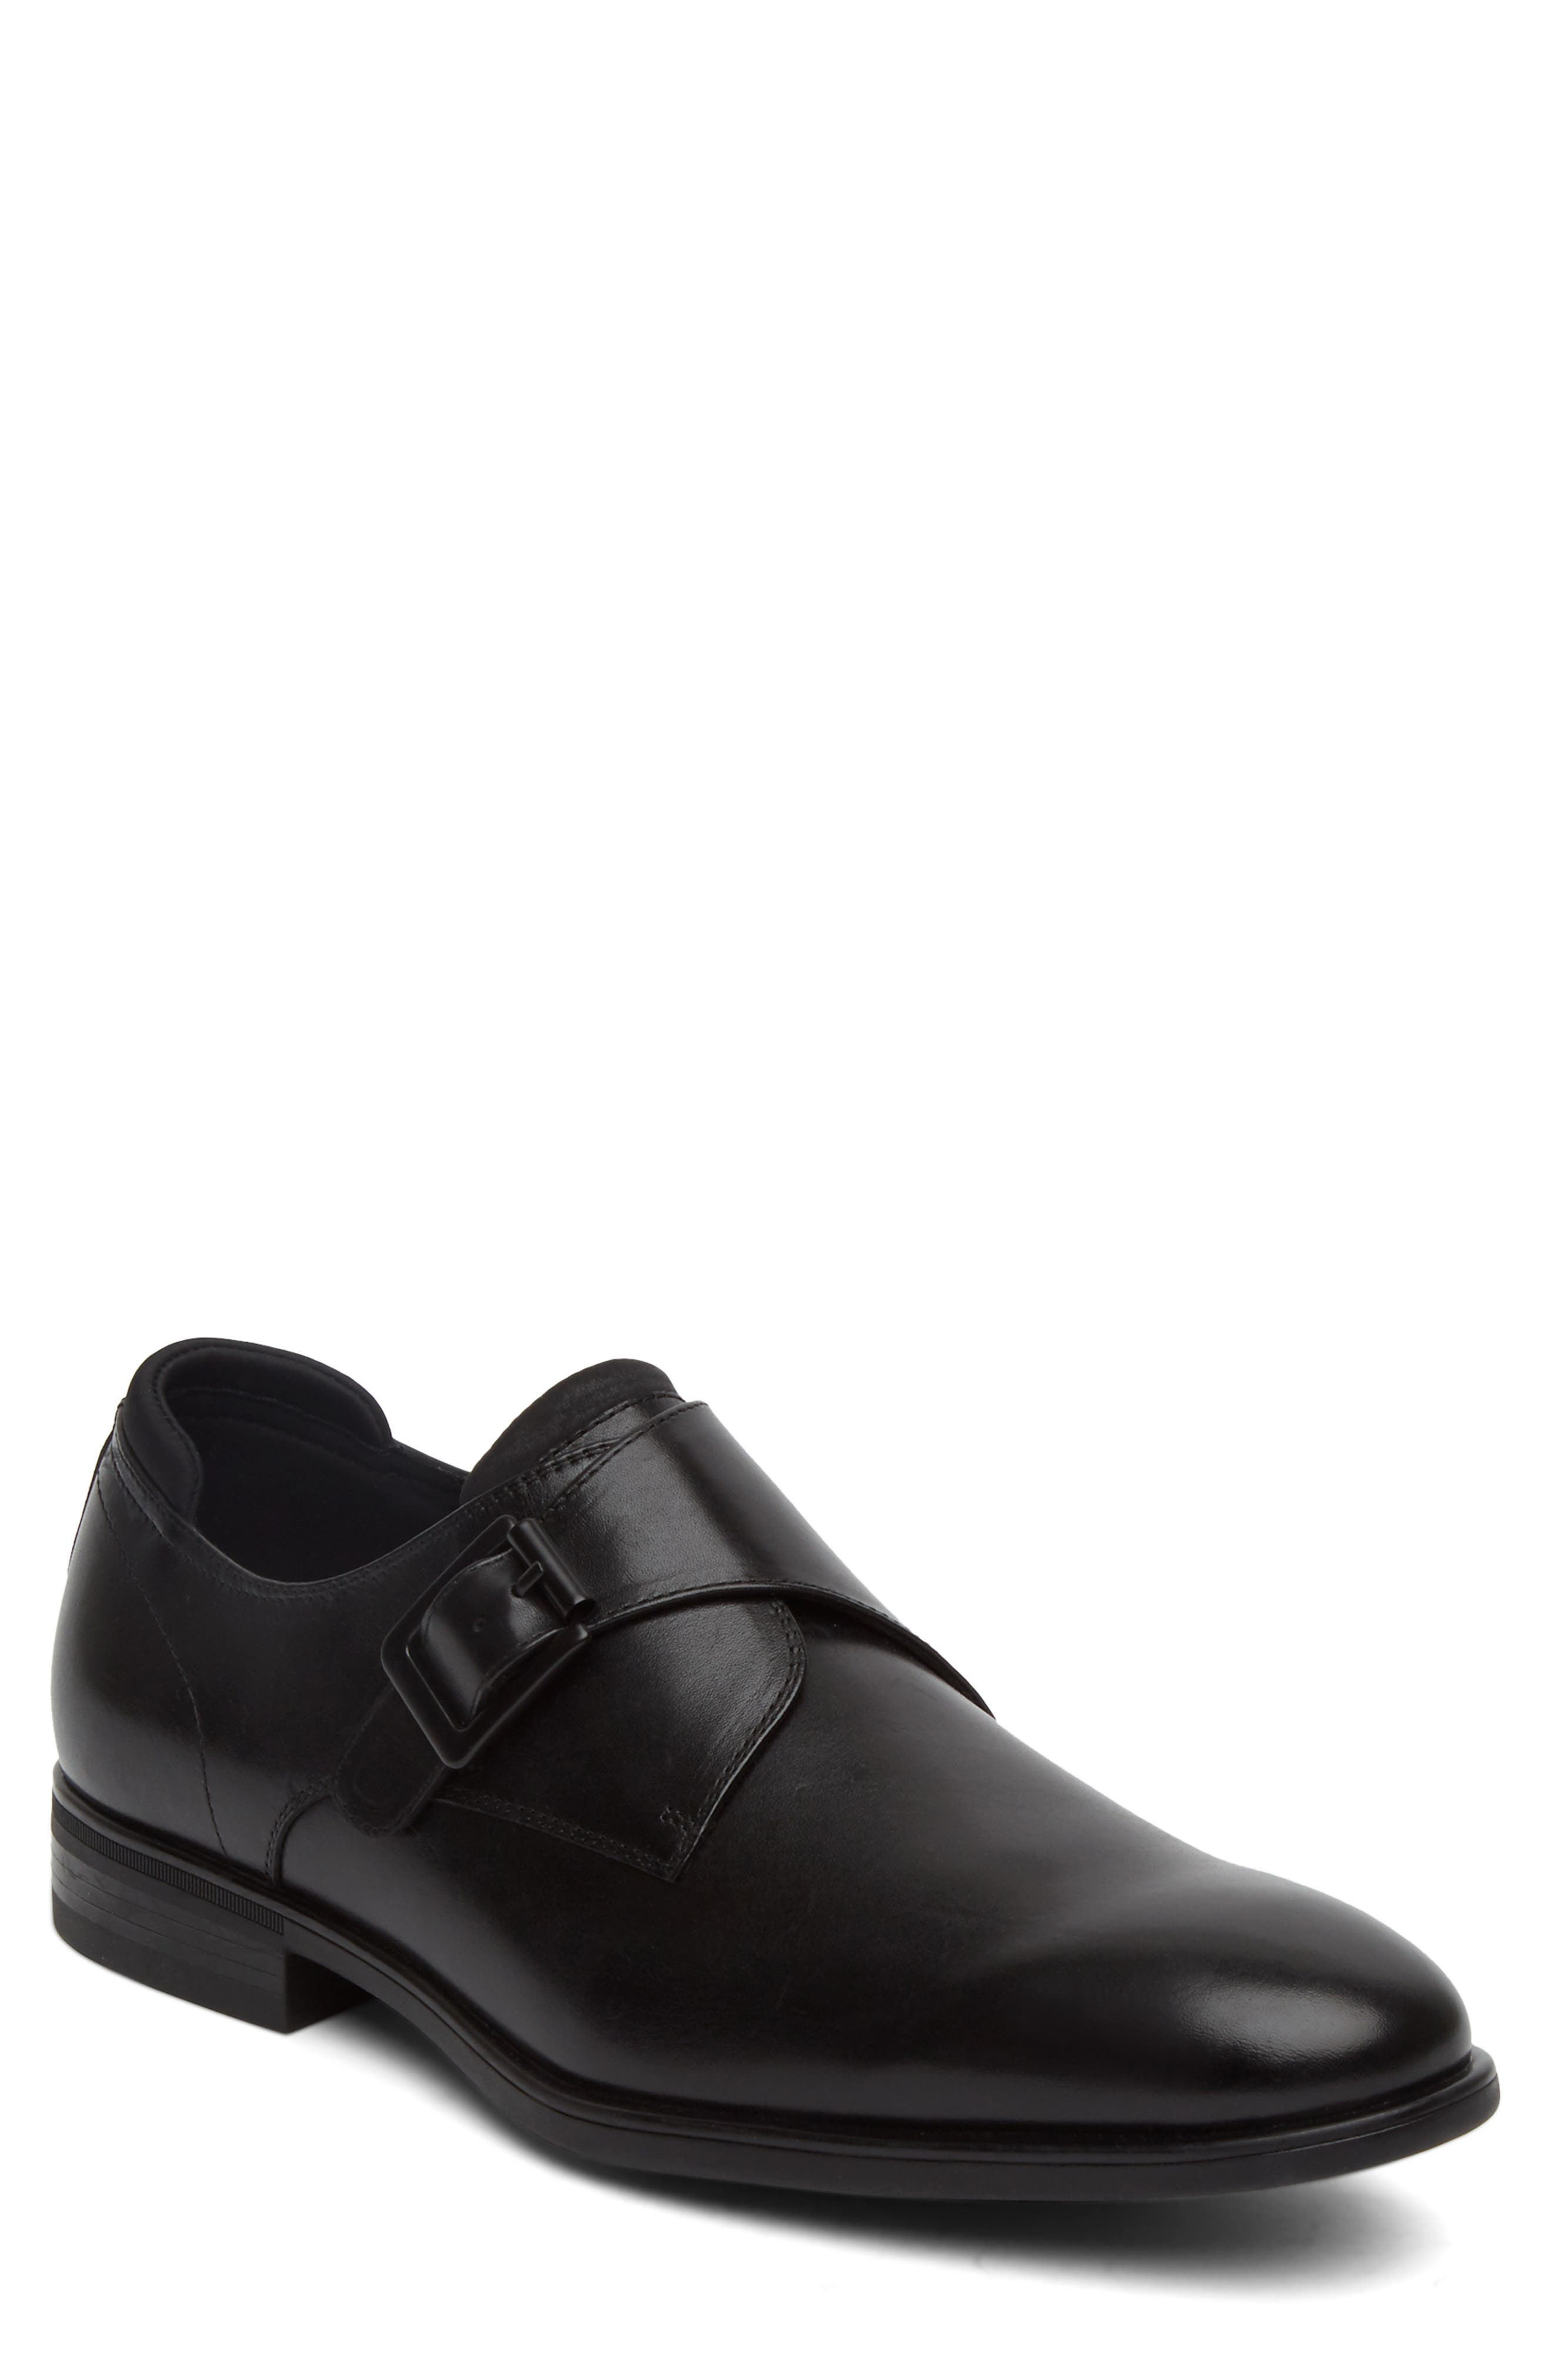 kenneth cole monk strap